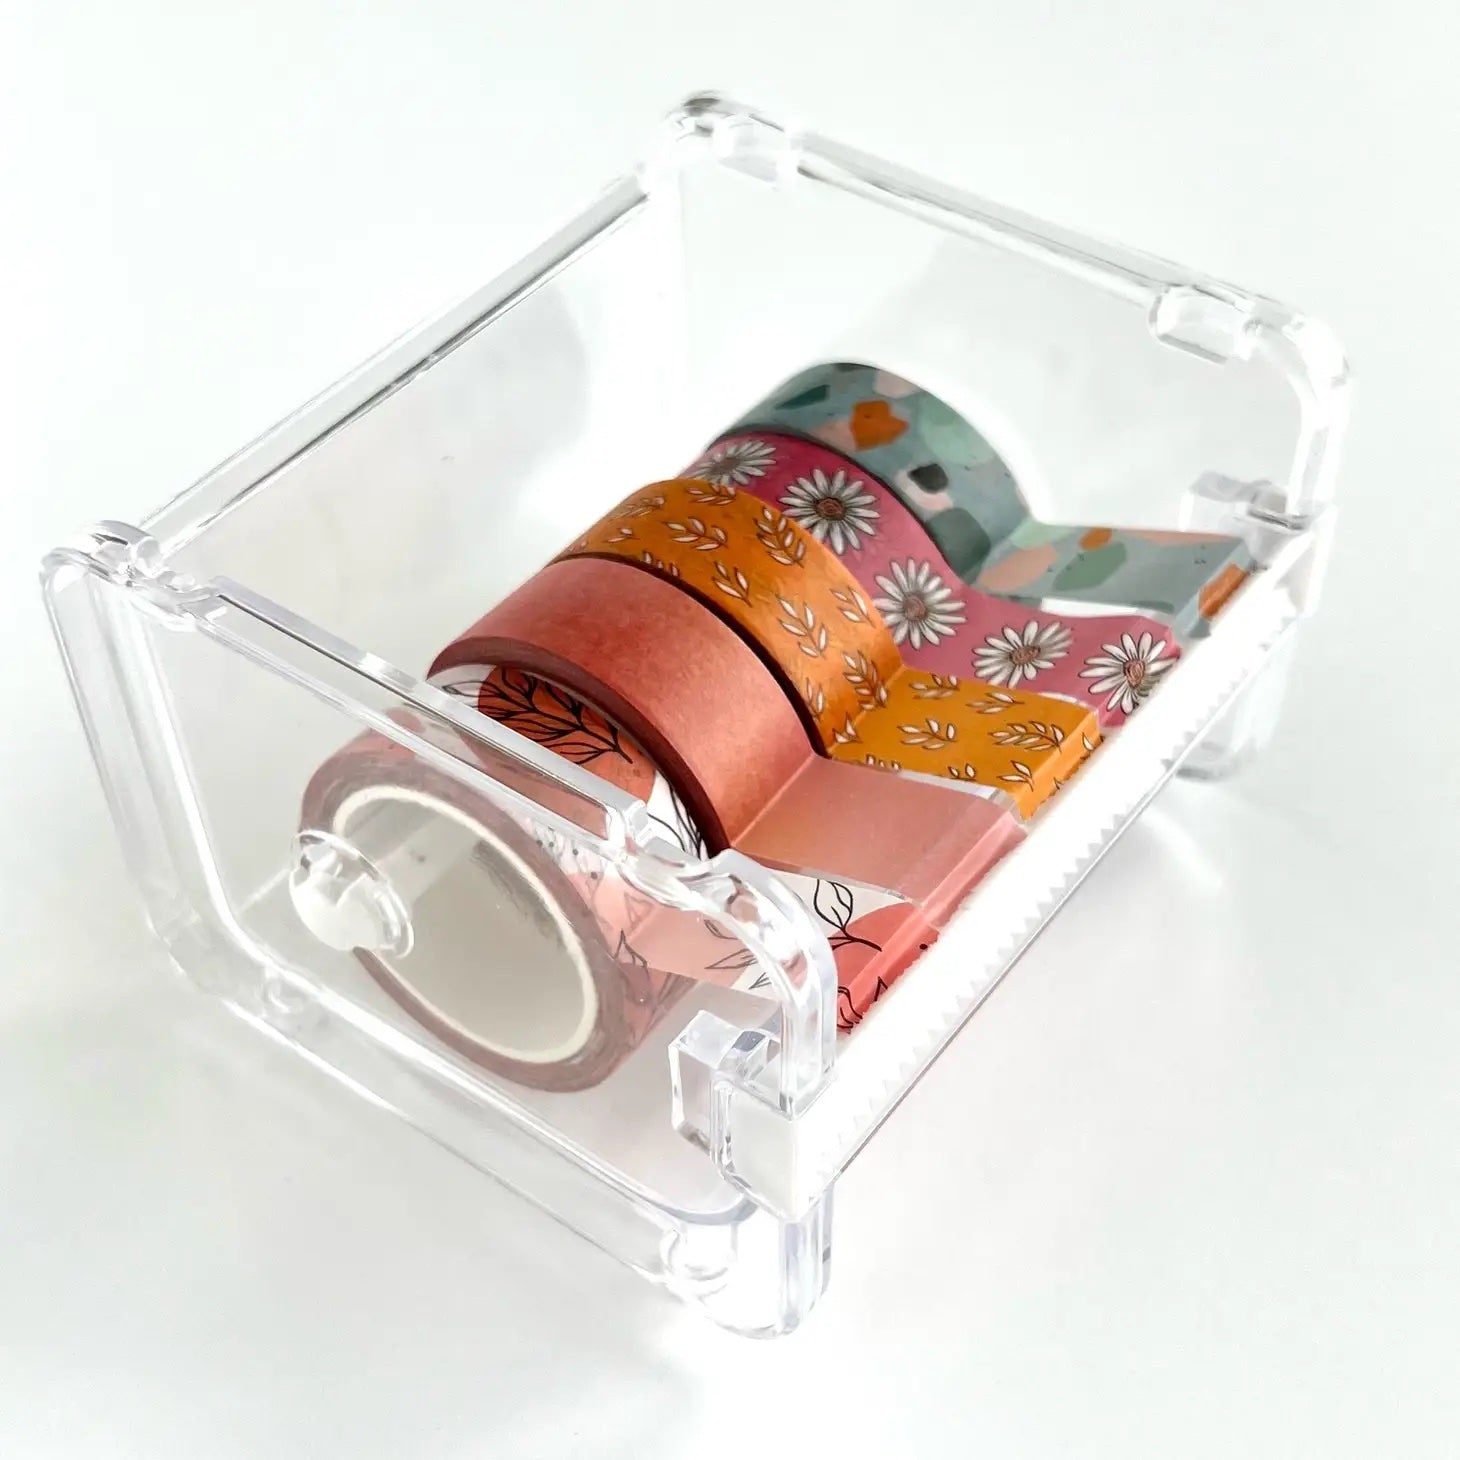 We R Memory Keepers Washi Tape Dispenser White 4.5 X 8.5 Inches